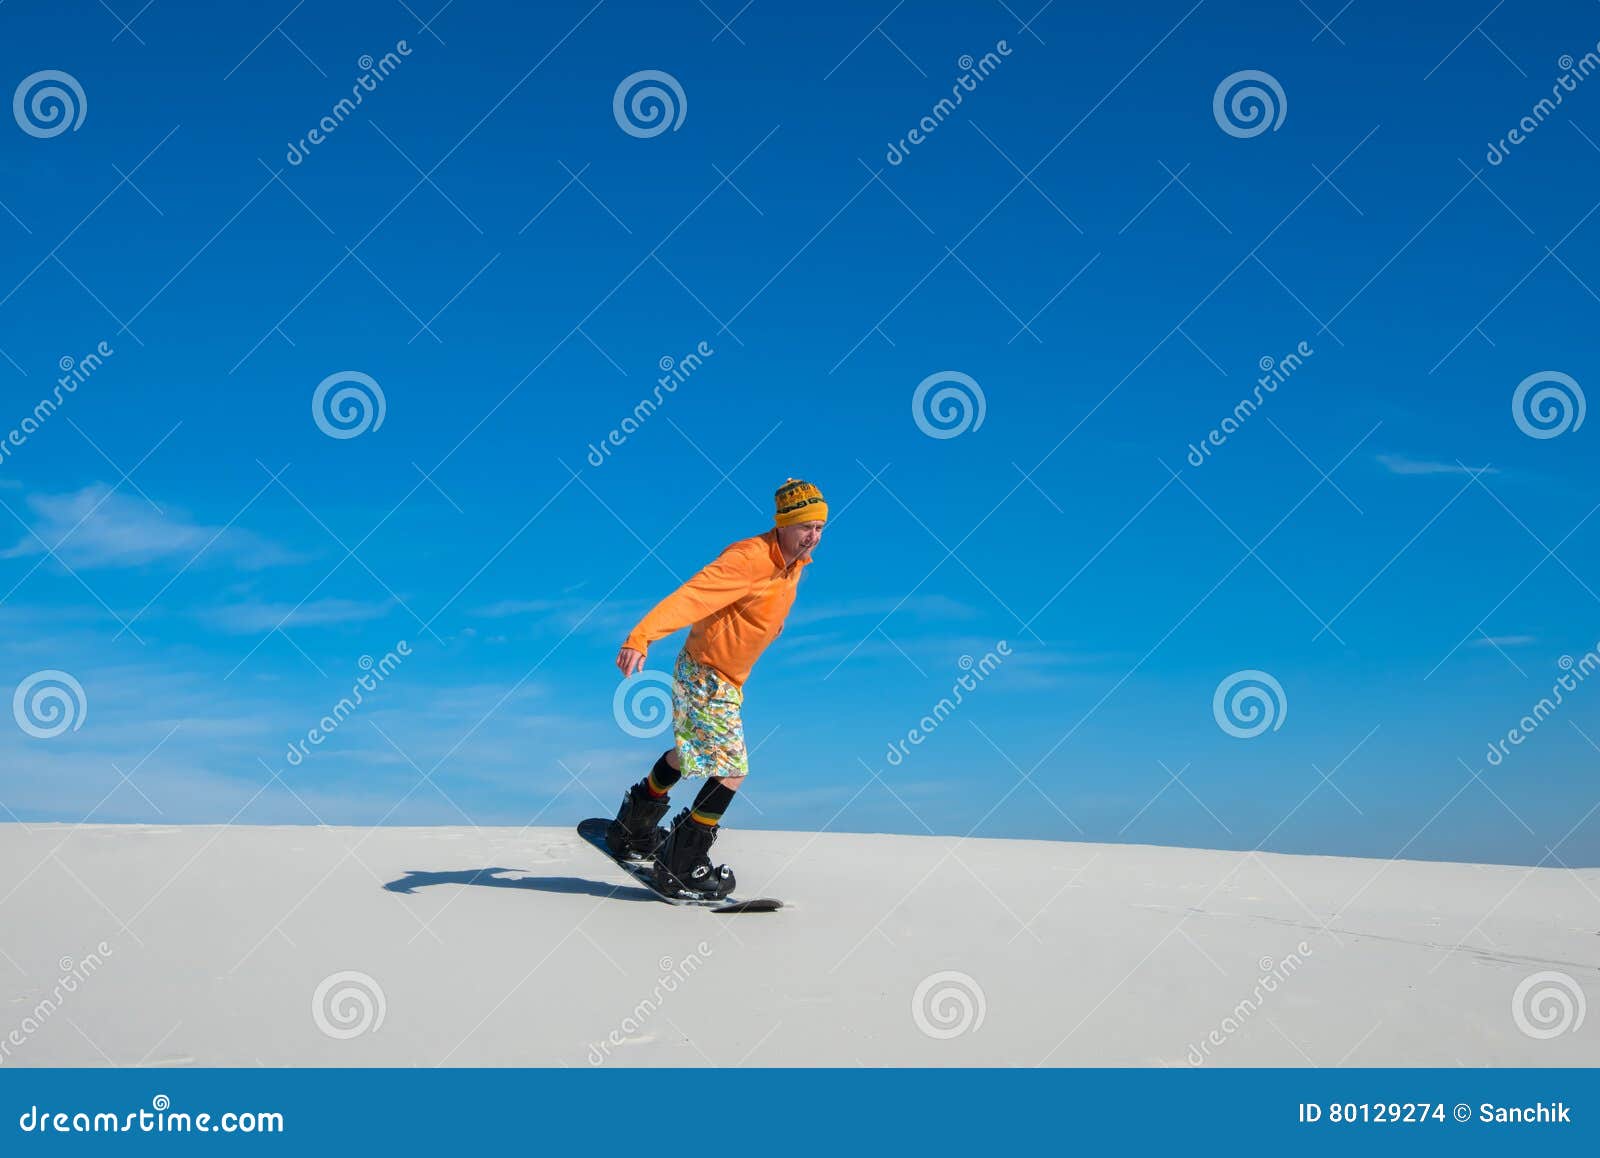 Man Making a Trick on Snowboard on Sand Slope Stock Photo - Image of ...